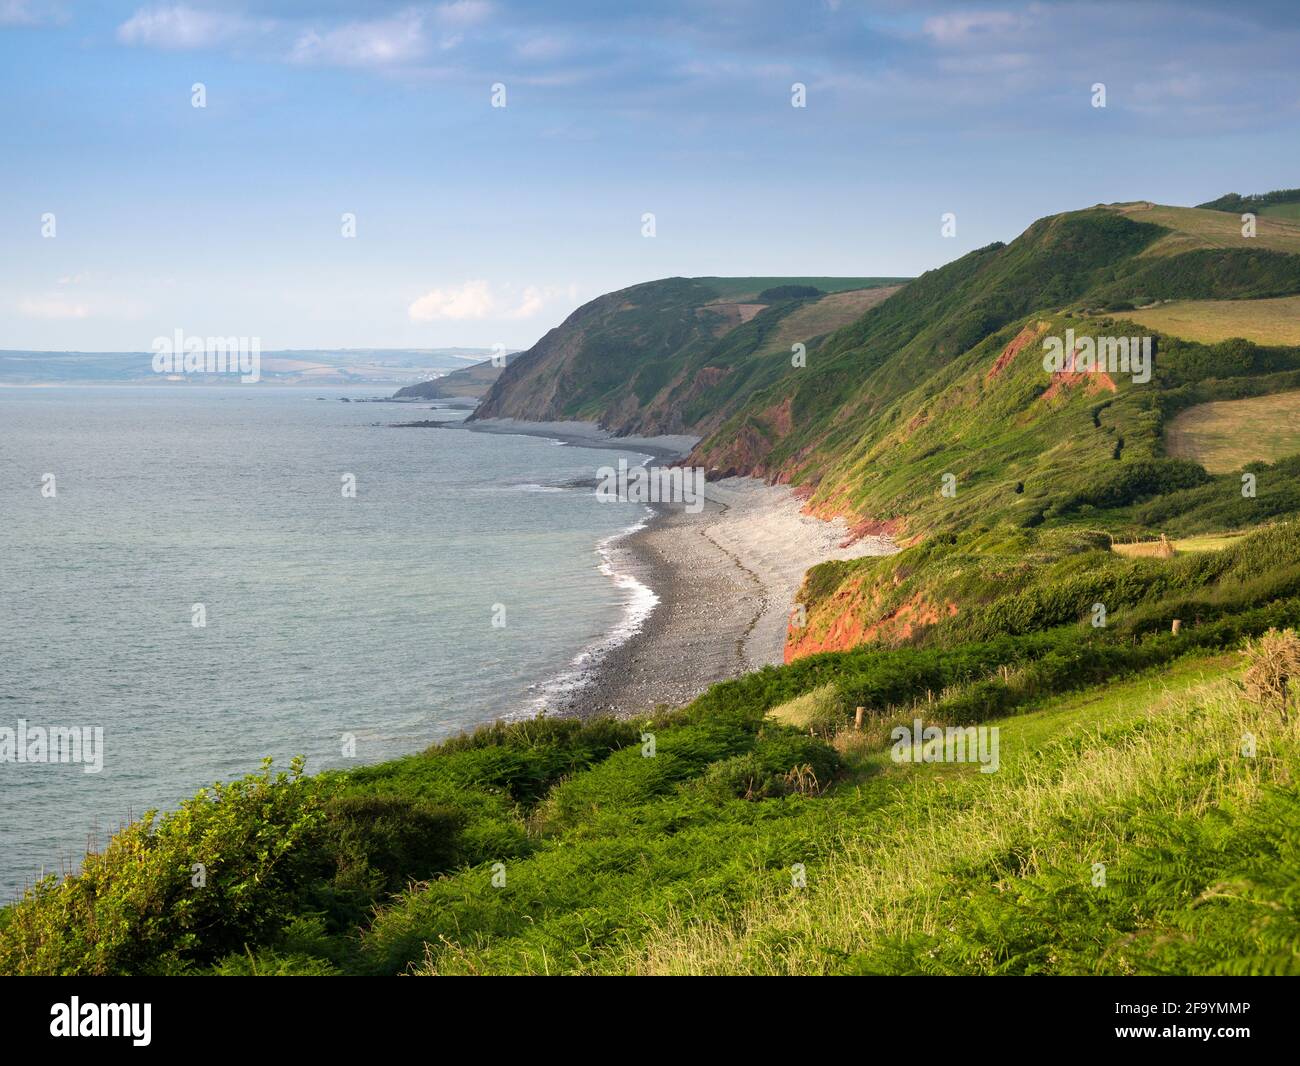 Peppercombe beach and Babbacombe Cliff from the South West Coast Path on the North Devon Coast, England. Stock Photo